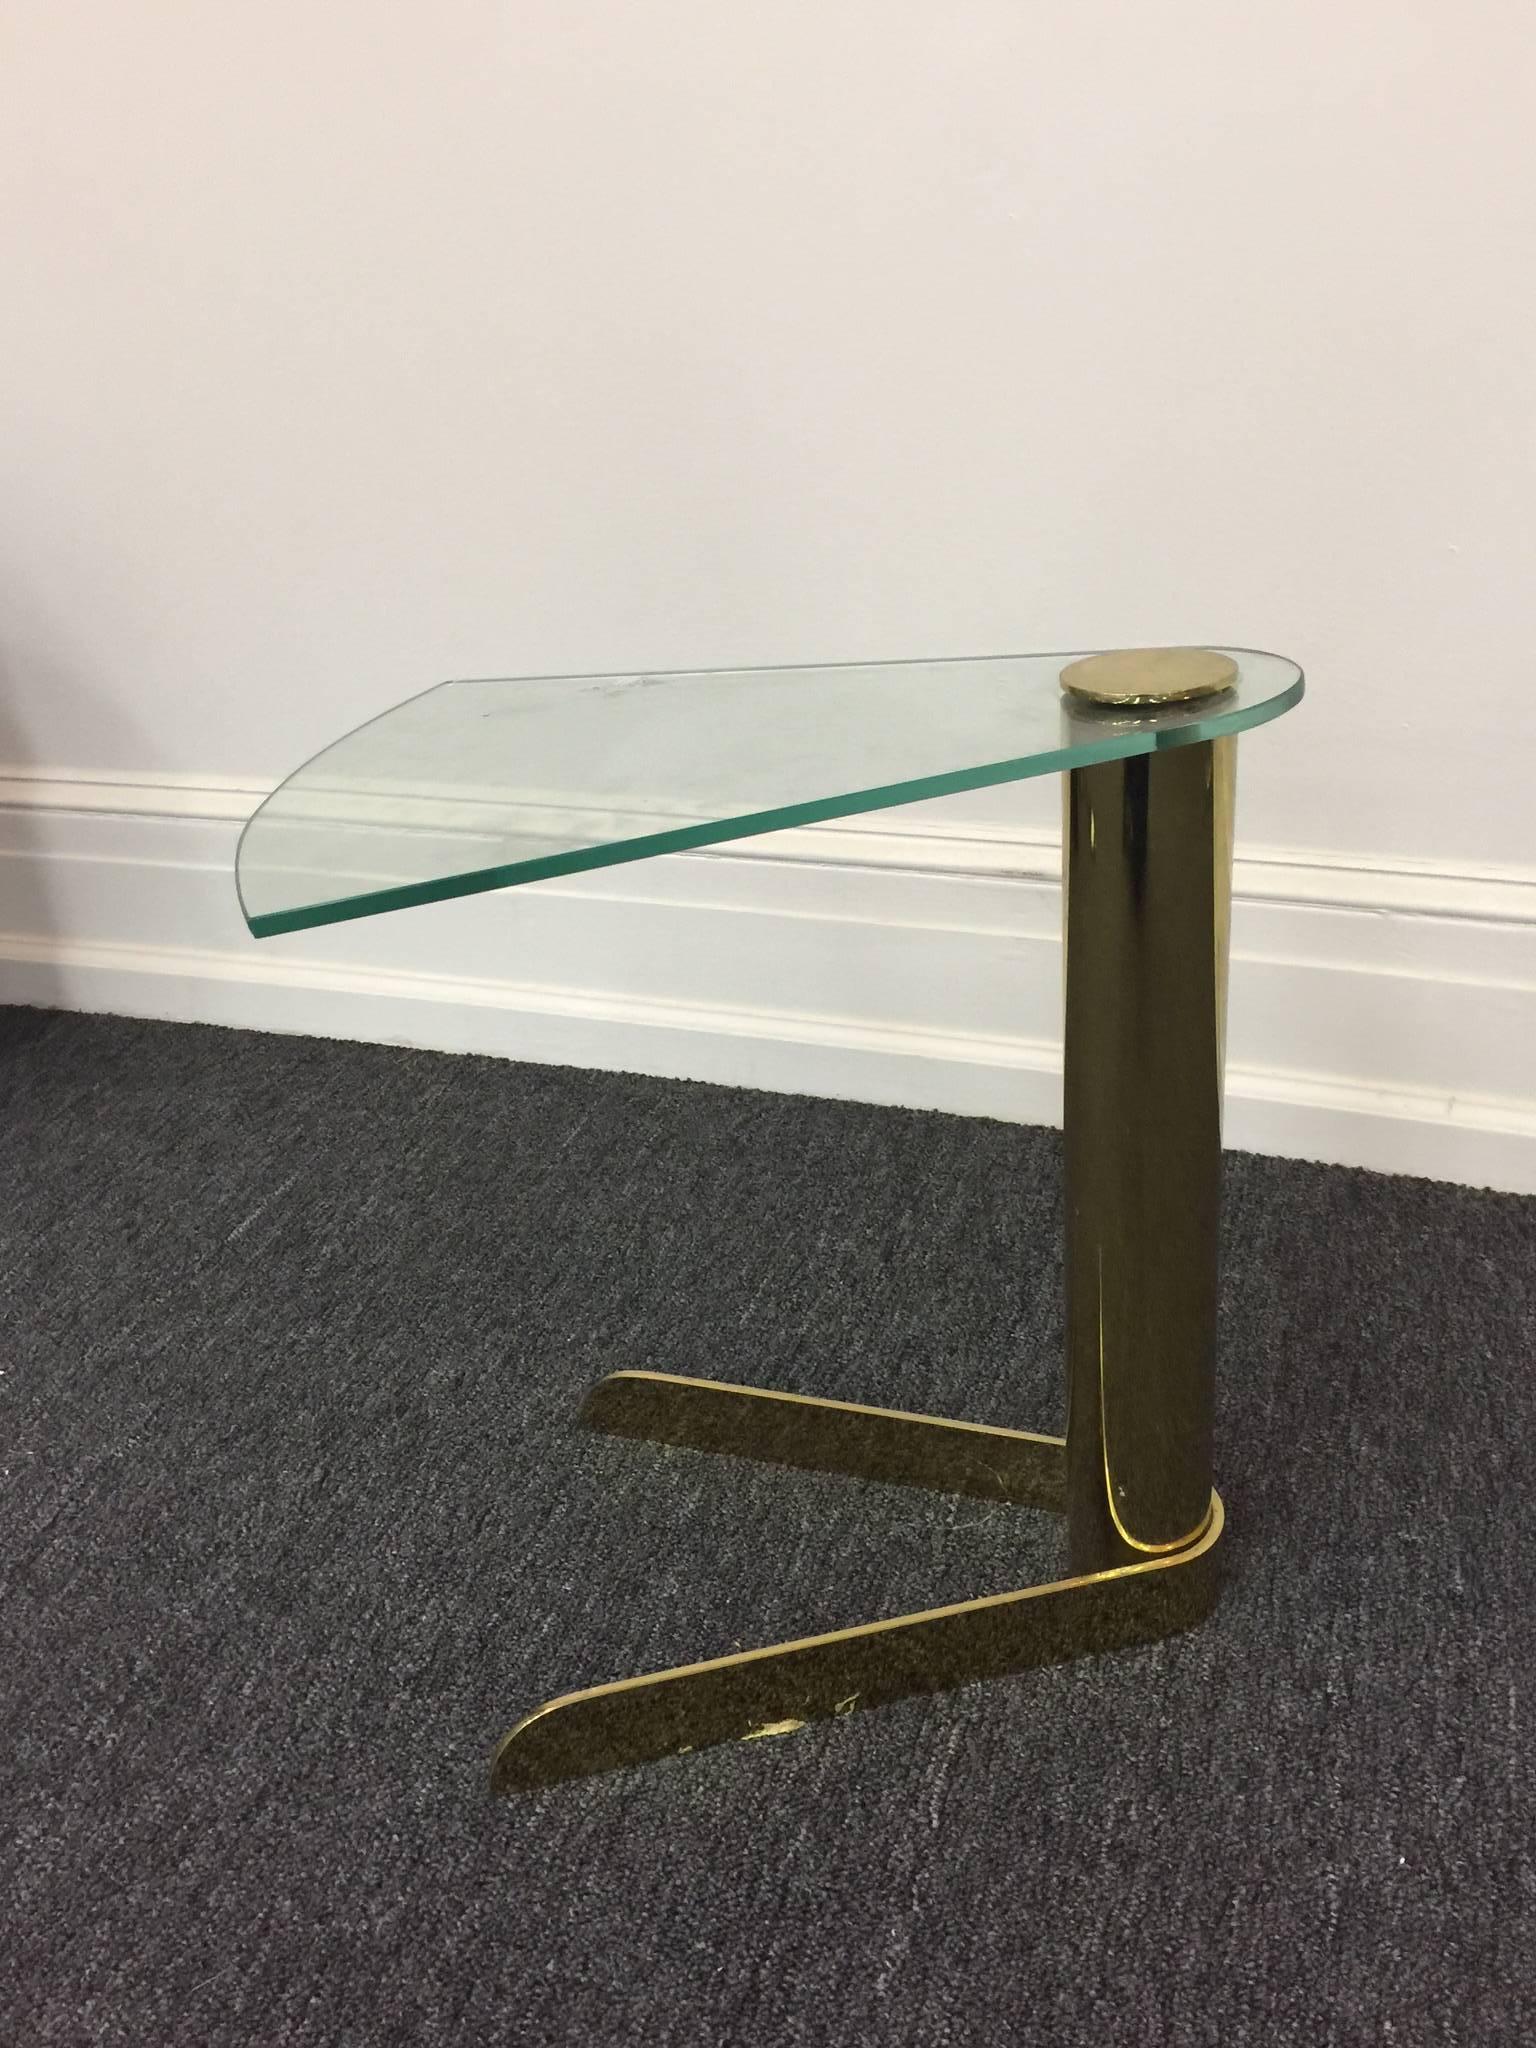 A Karl Springer style sculptural wedge shaped side or drink table with polished green edged glass top and brass column base.
 